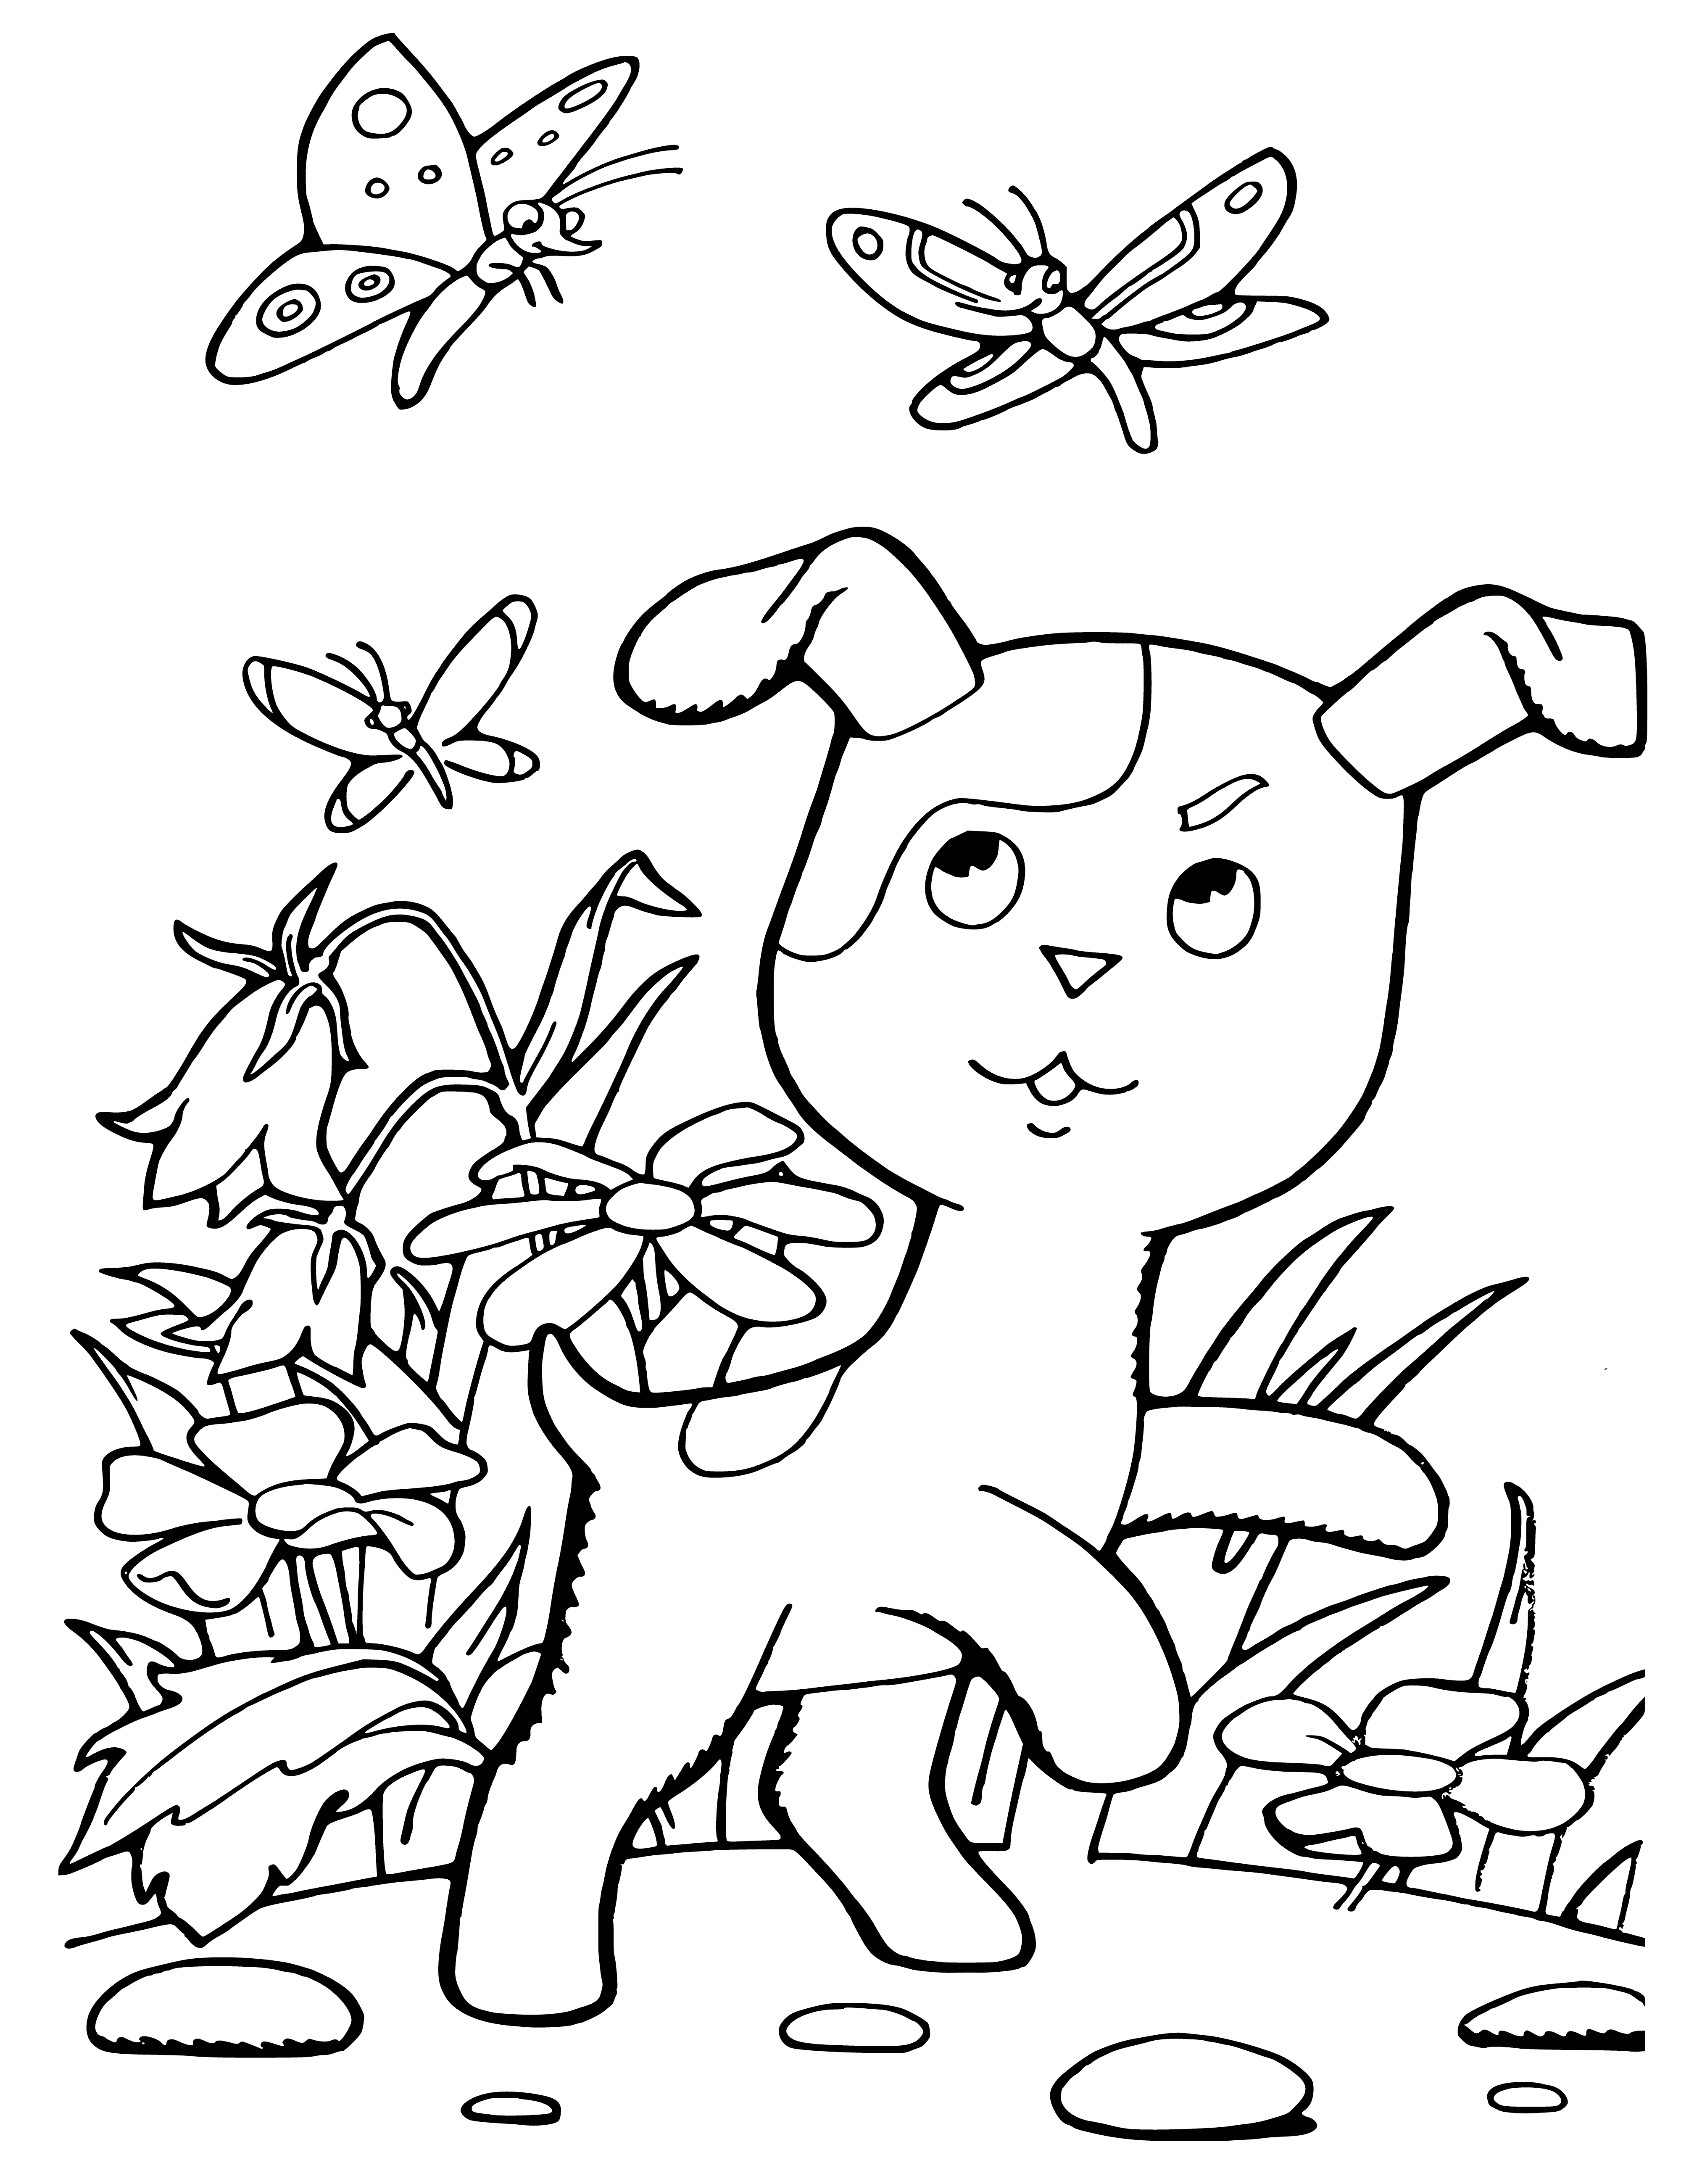 coloring page: Toy for small dog: rubber/plastic ball w/ cloth "tail" attached.